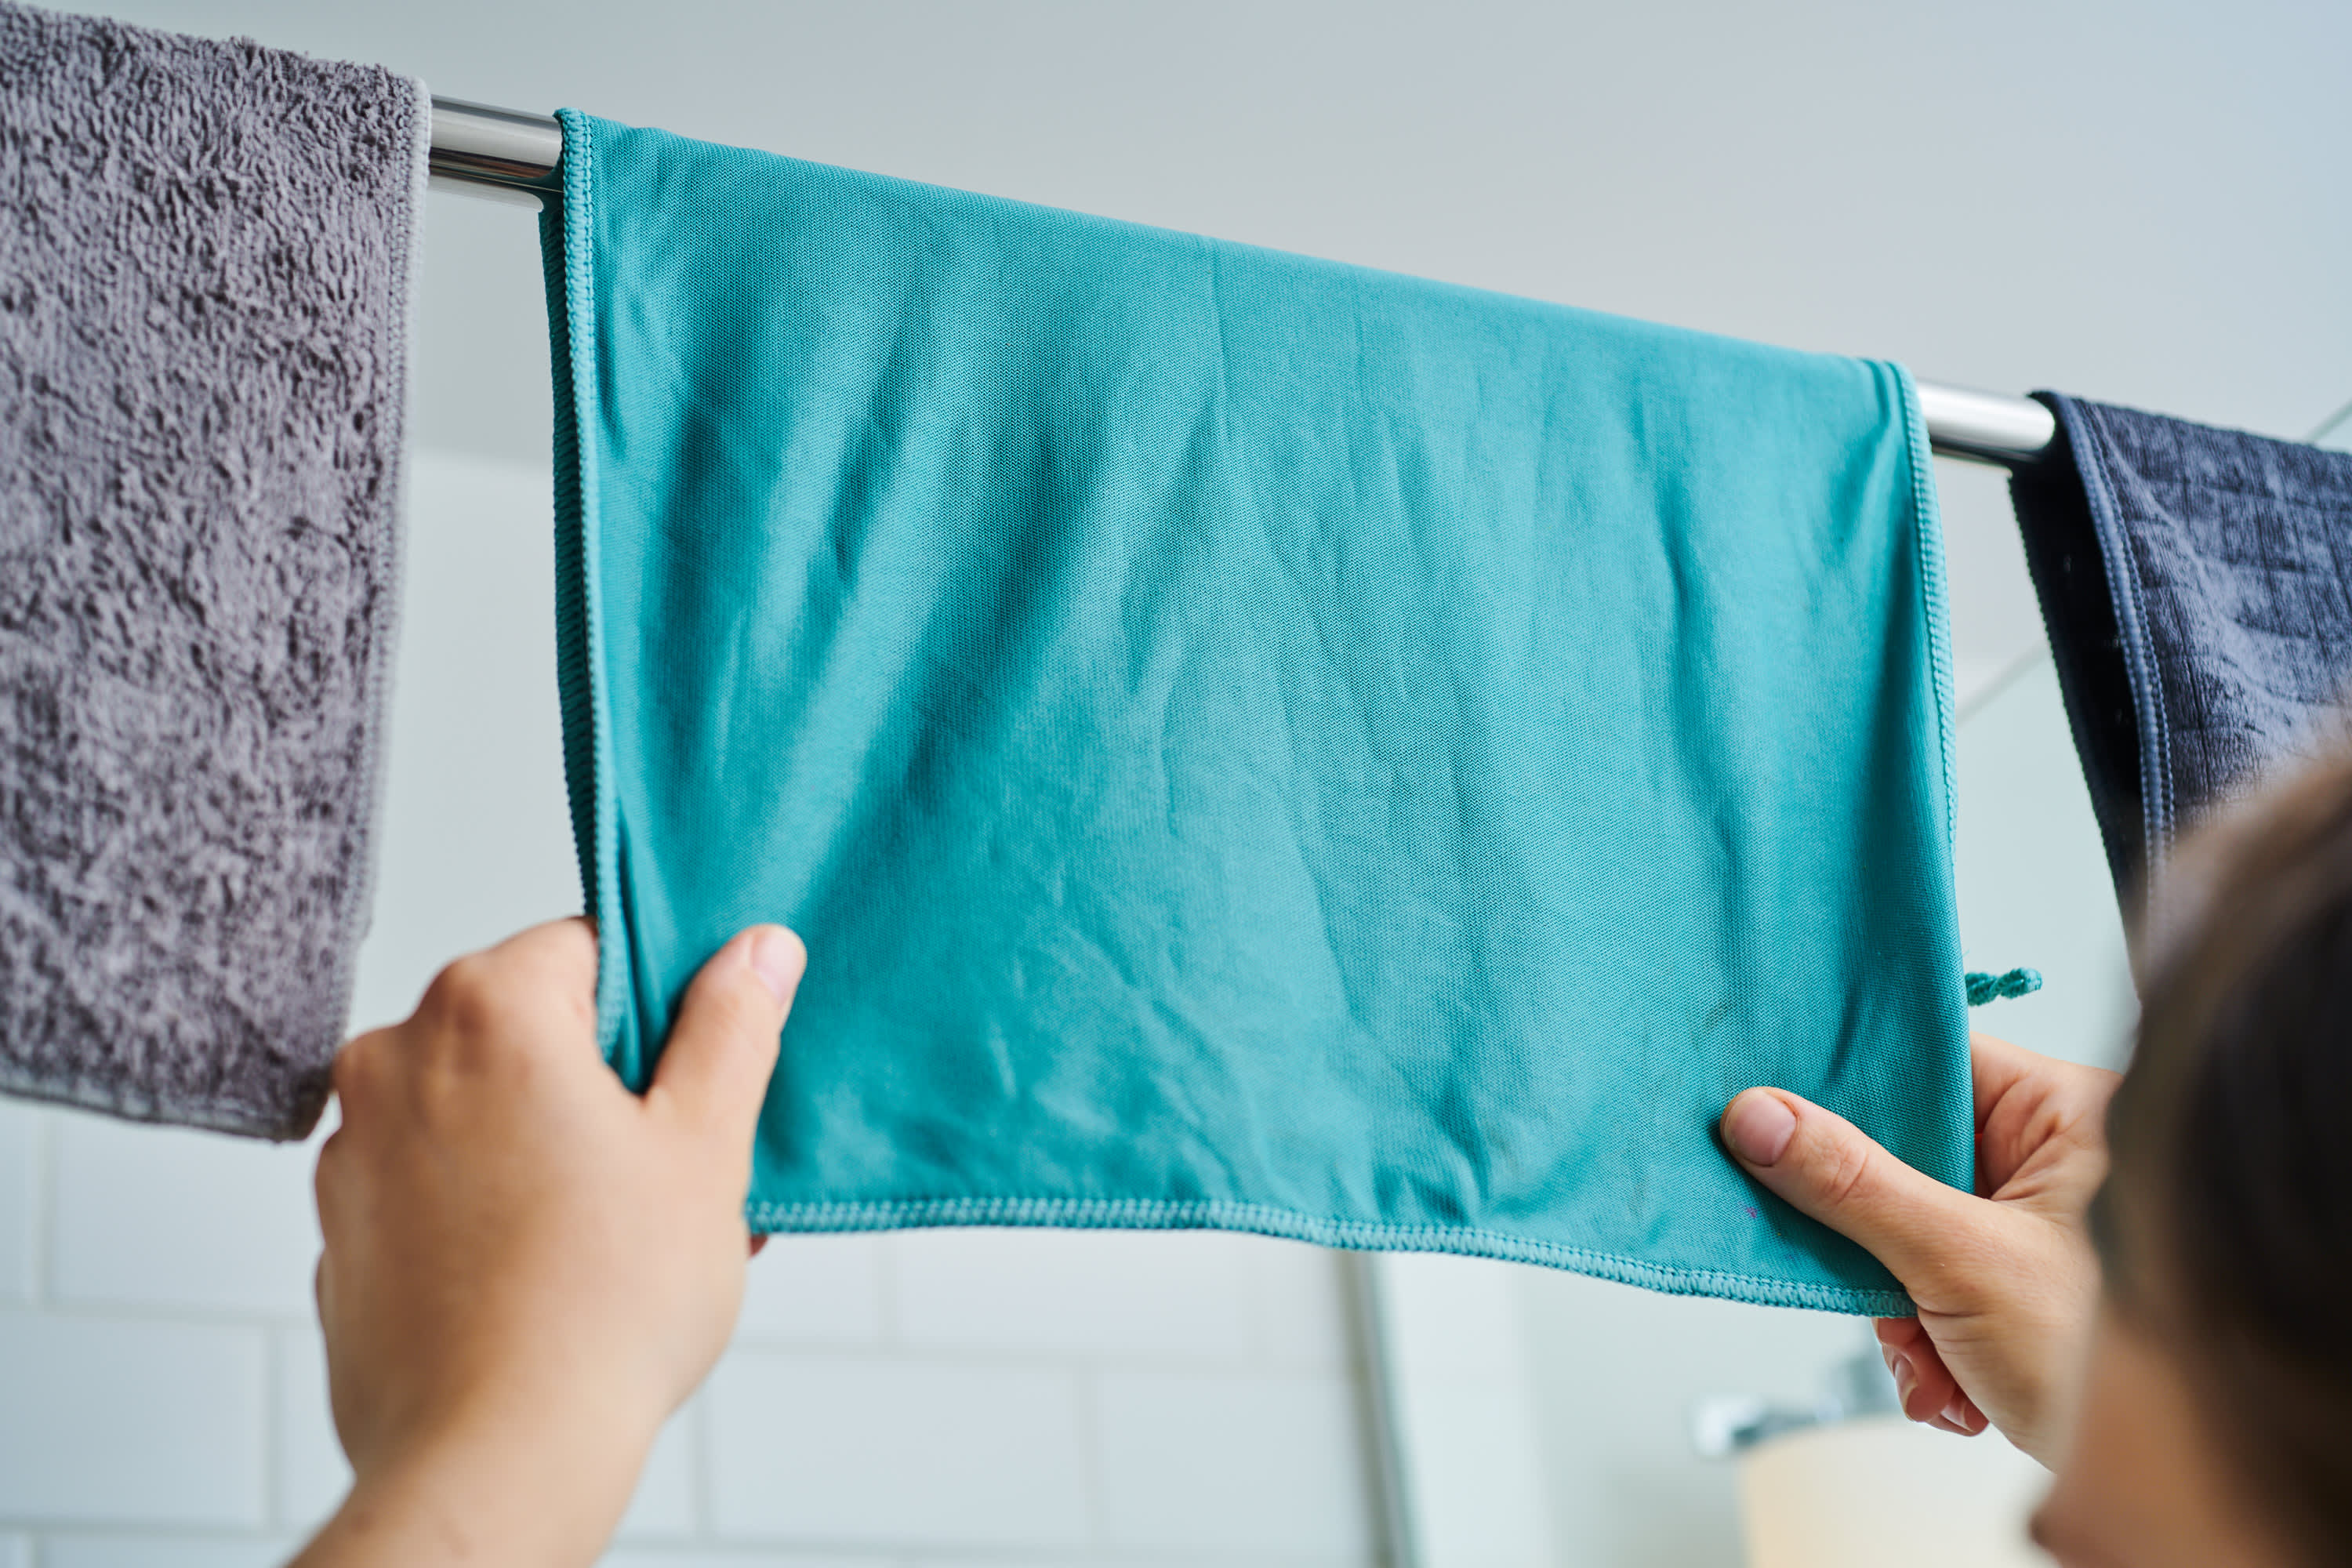 How to Clean Microfiber Cloths  Kitchn